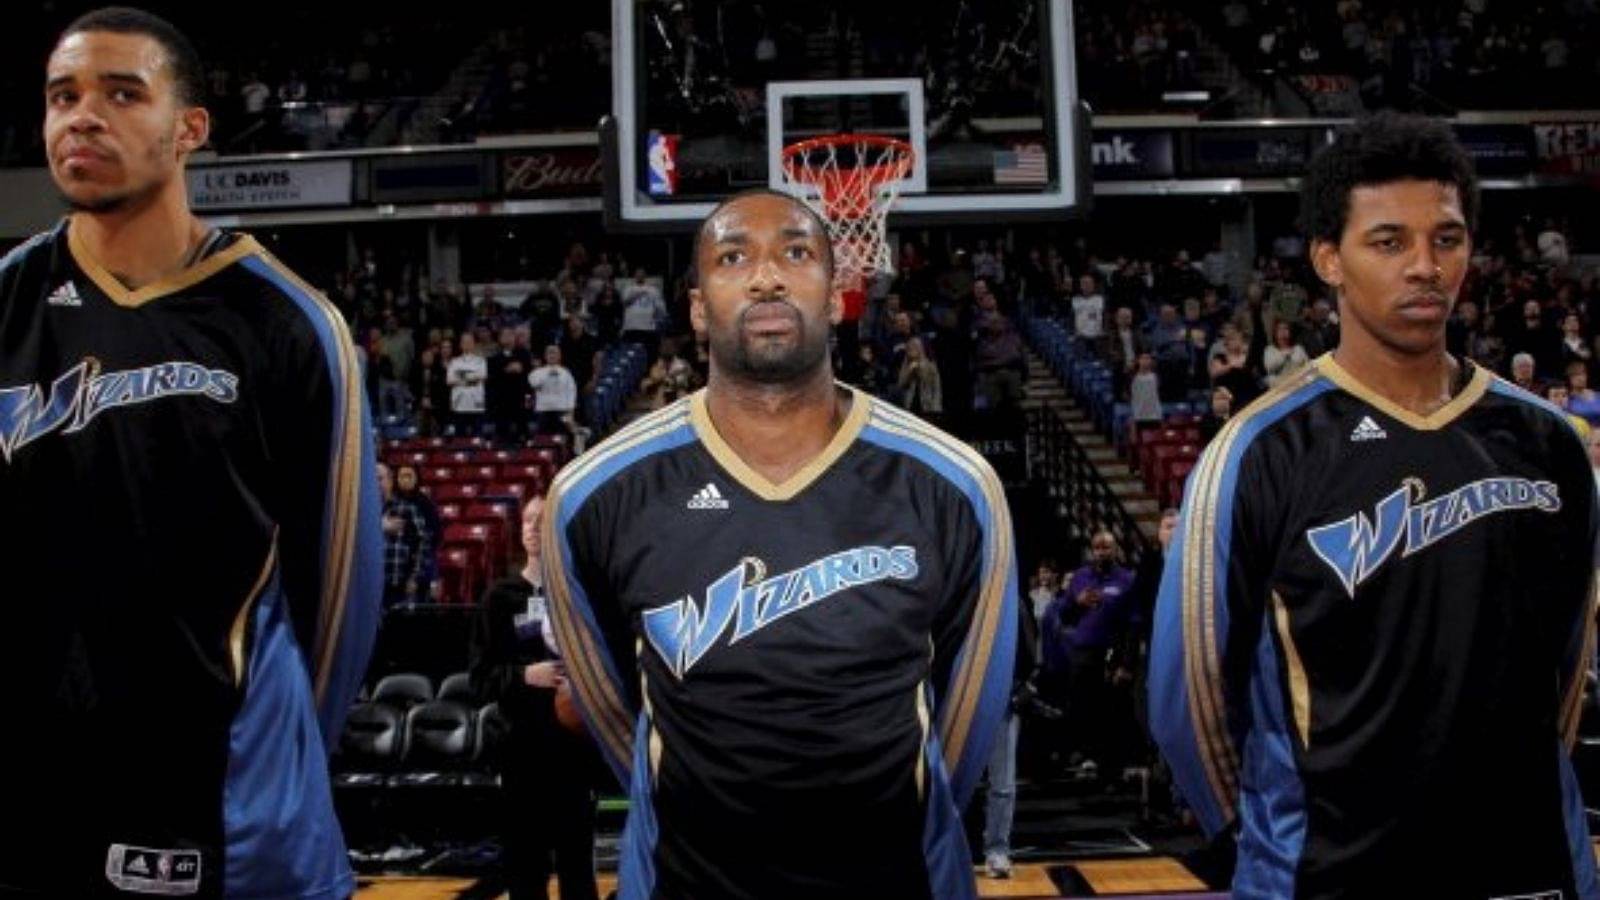 "A heated card game almost led Gilbert Arenas to a deadly Gun-fight": How JaVale McGee could have ended up as an unintentional instigator of Agent 0's death